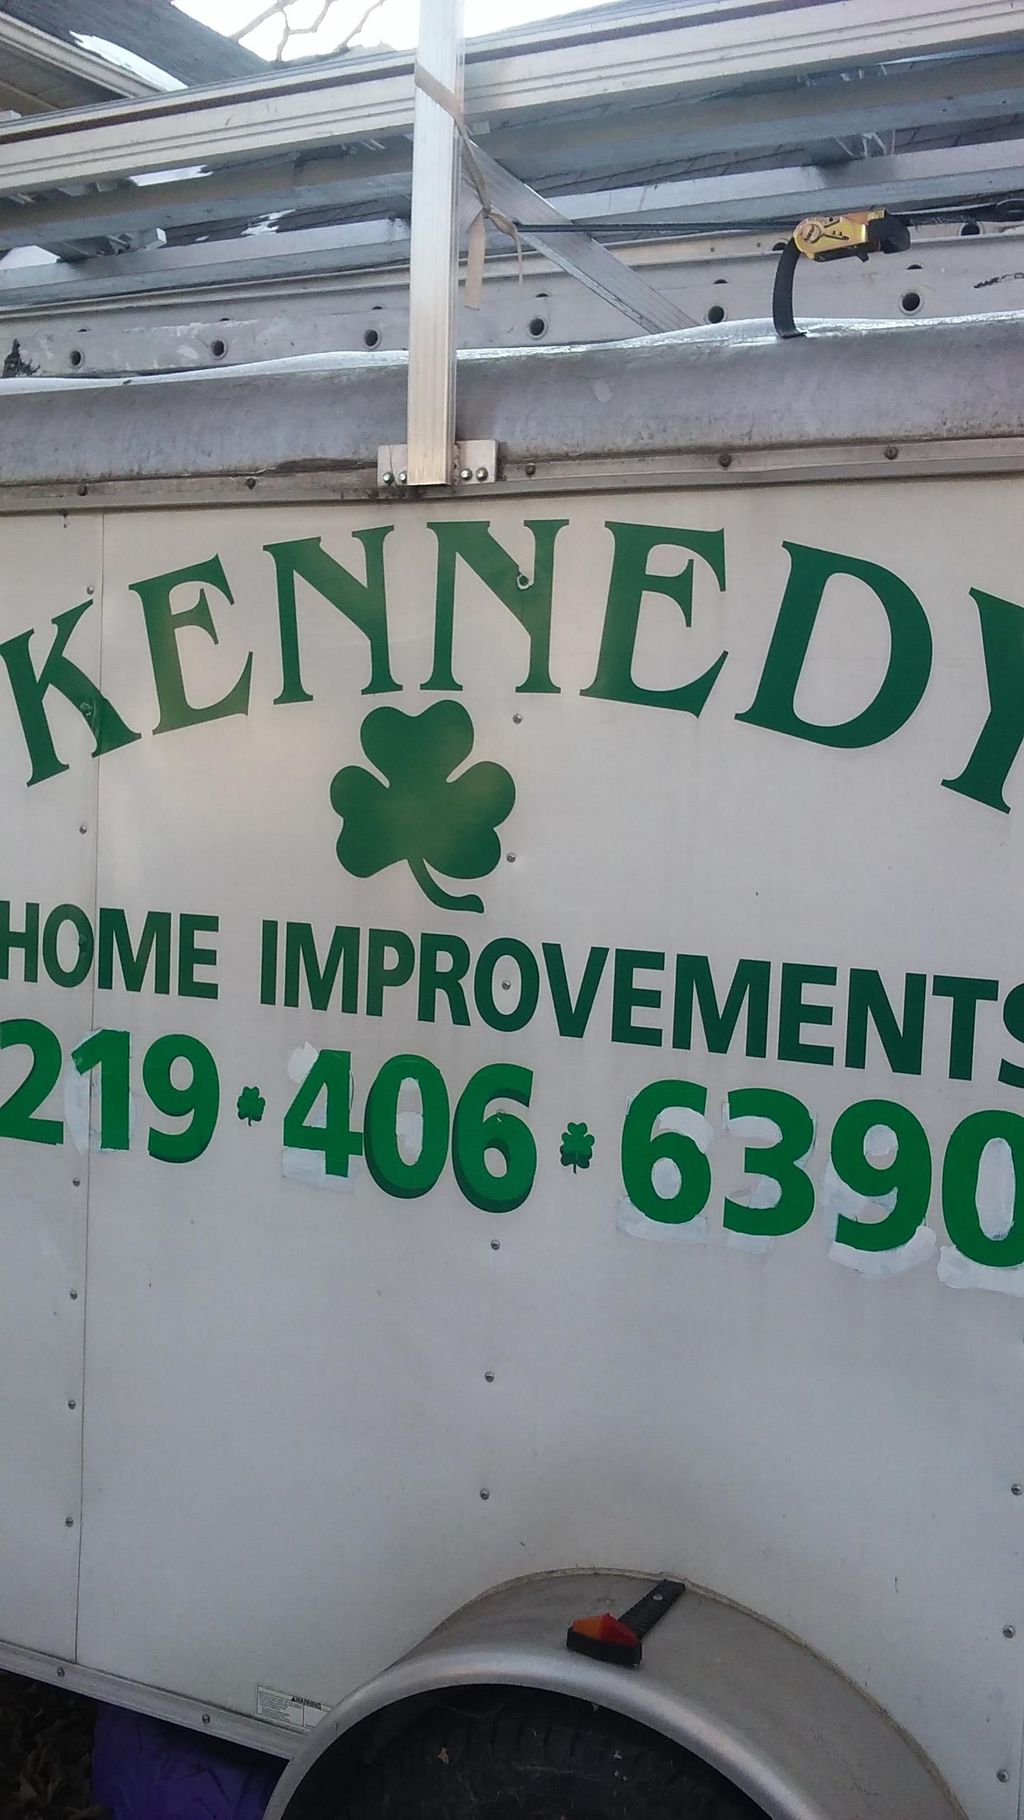 Kennedy Home Improvements